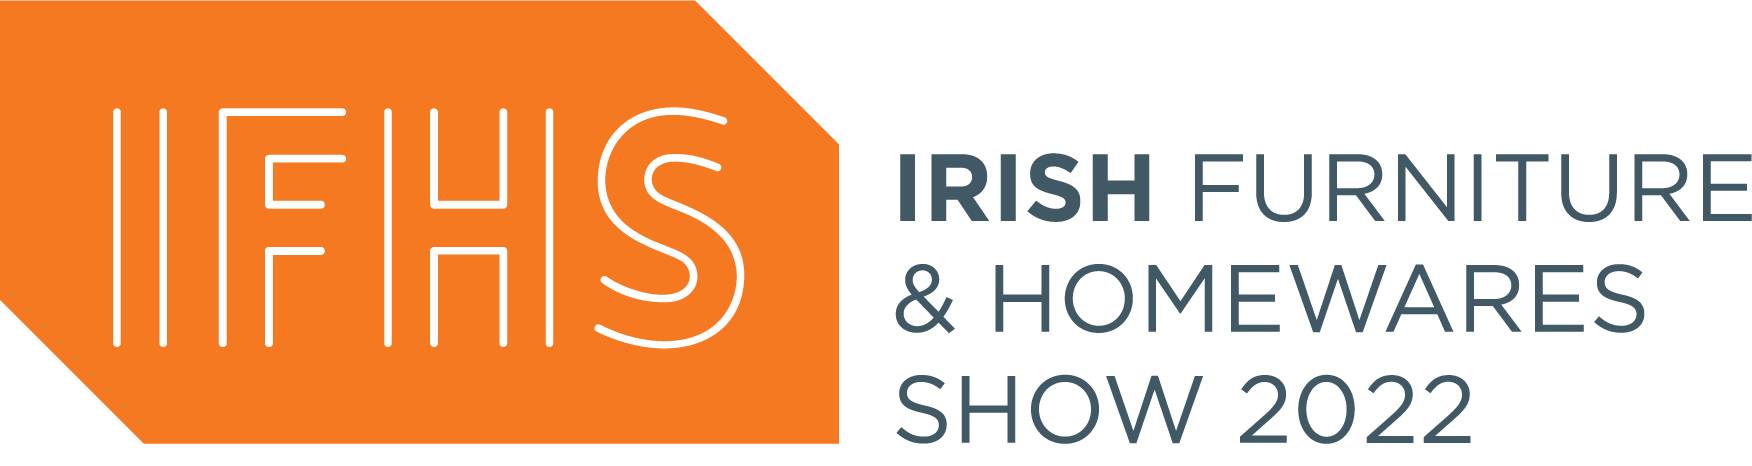 Honey B are first to offer Retailer Assistance Platform - IFHS Tradeshow